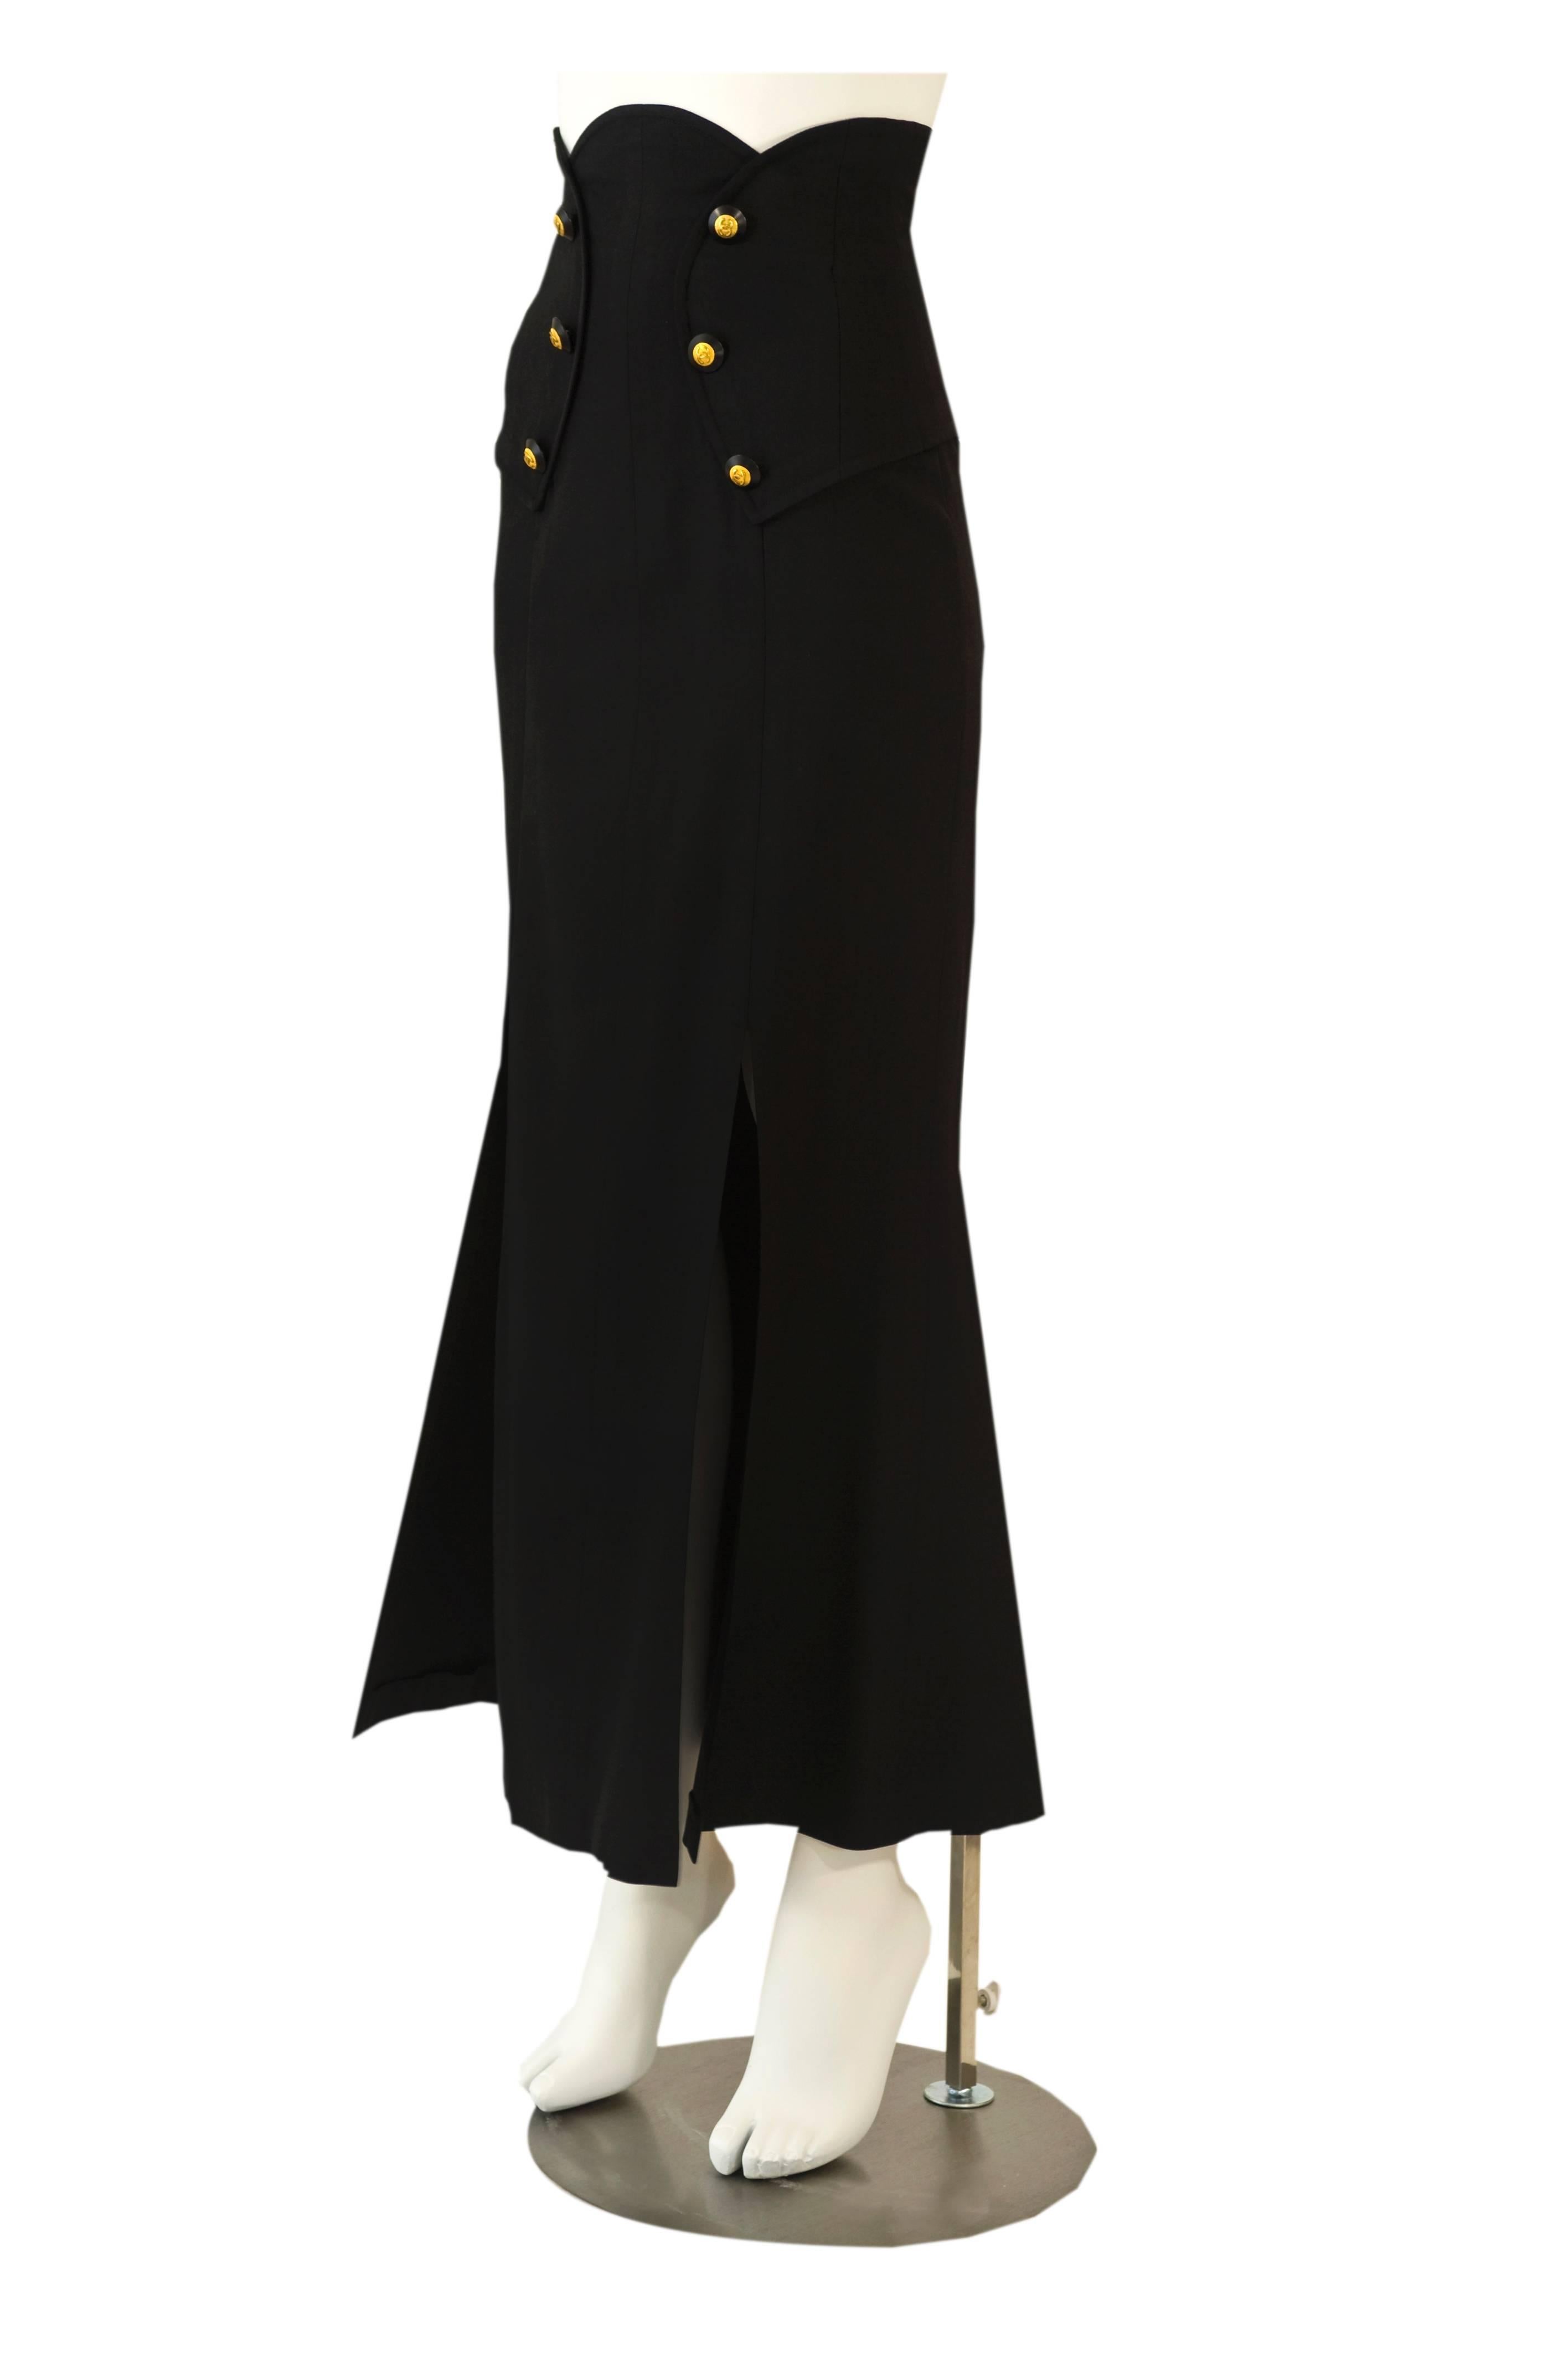 This is a fantastic  vintage Chanel skirt  that will never go out of style.  Done in a fine  black medium to lightweight wool with a beautiful sculptural panel that curves around  the waistline. There are six black buttons with the golden